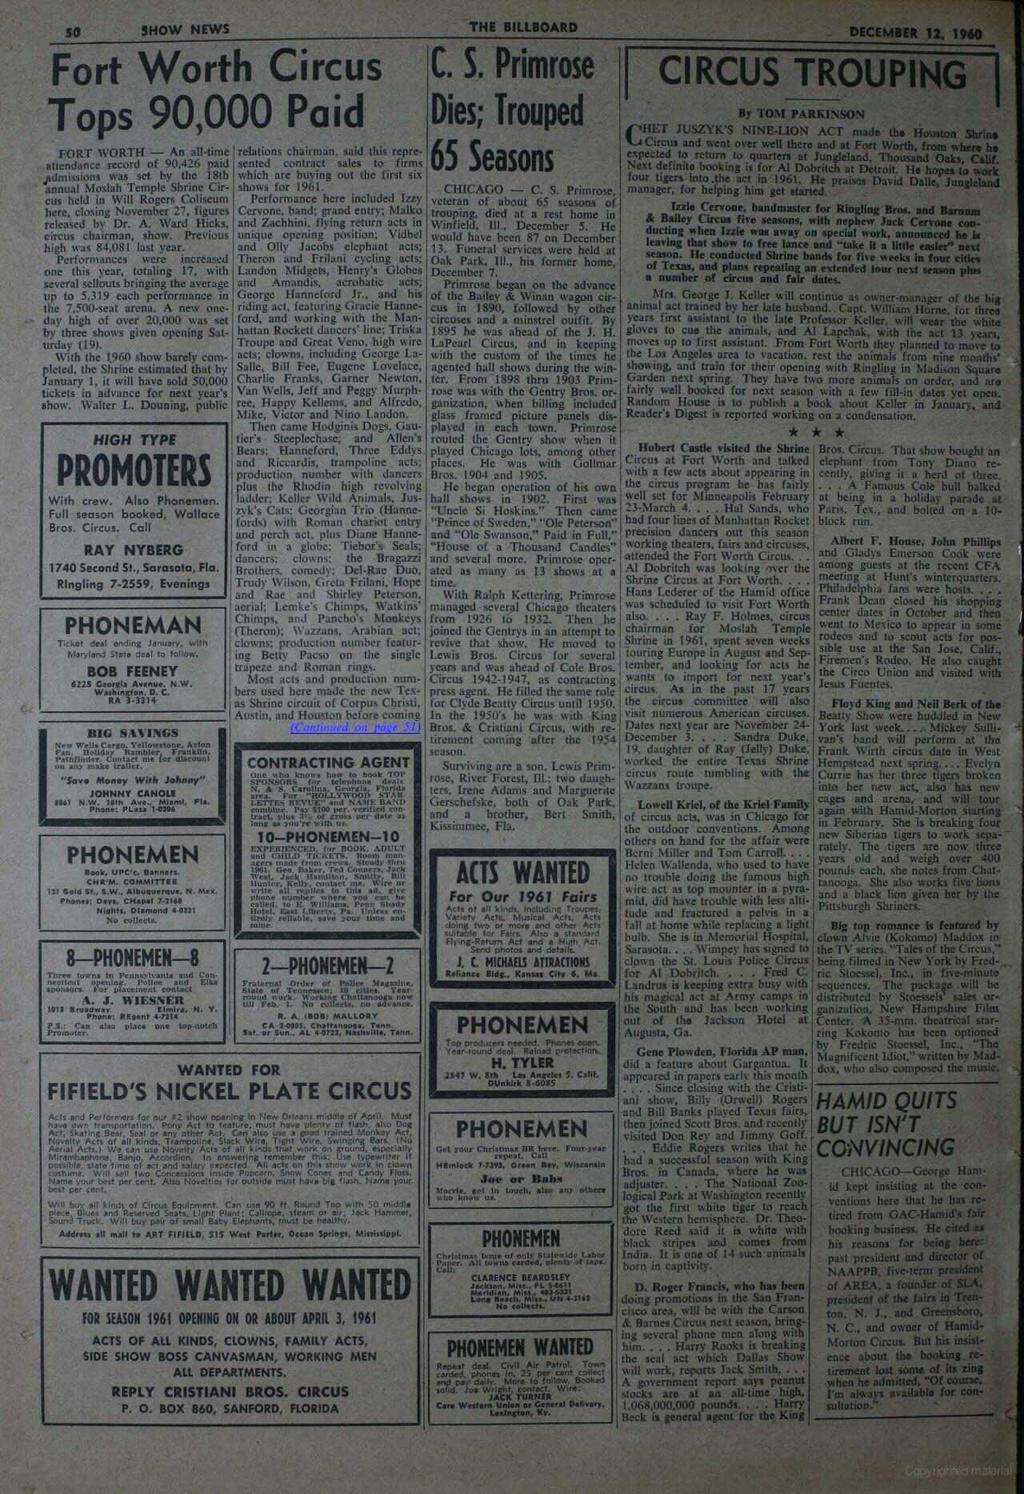 50 SHOW NEWS THE BILLBOARD DECEMBER 12. 1960 Fort Worth Circus Ca S.